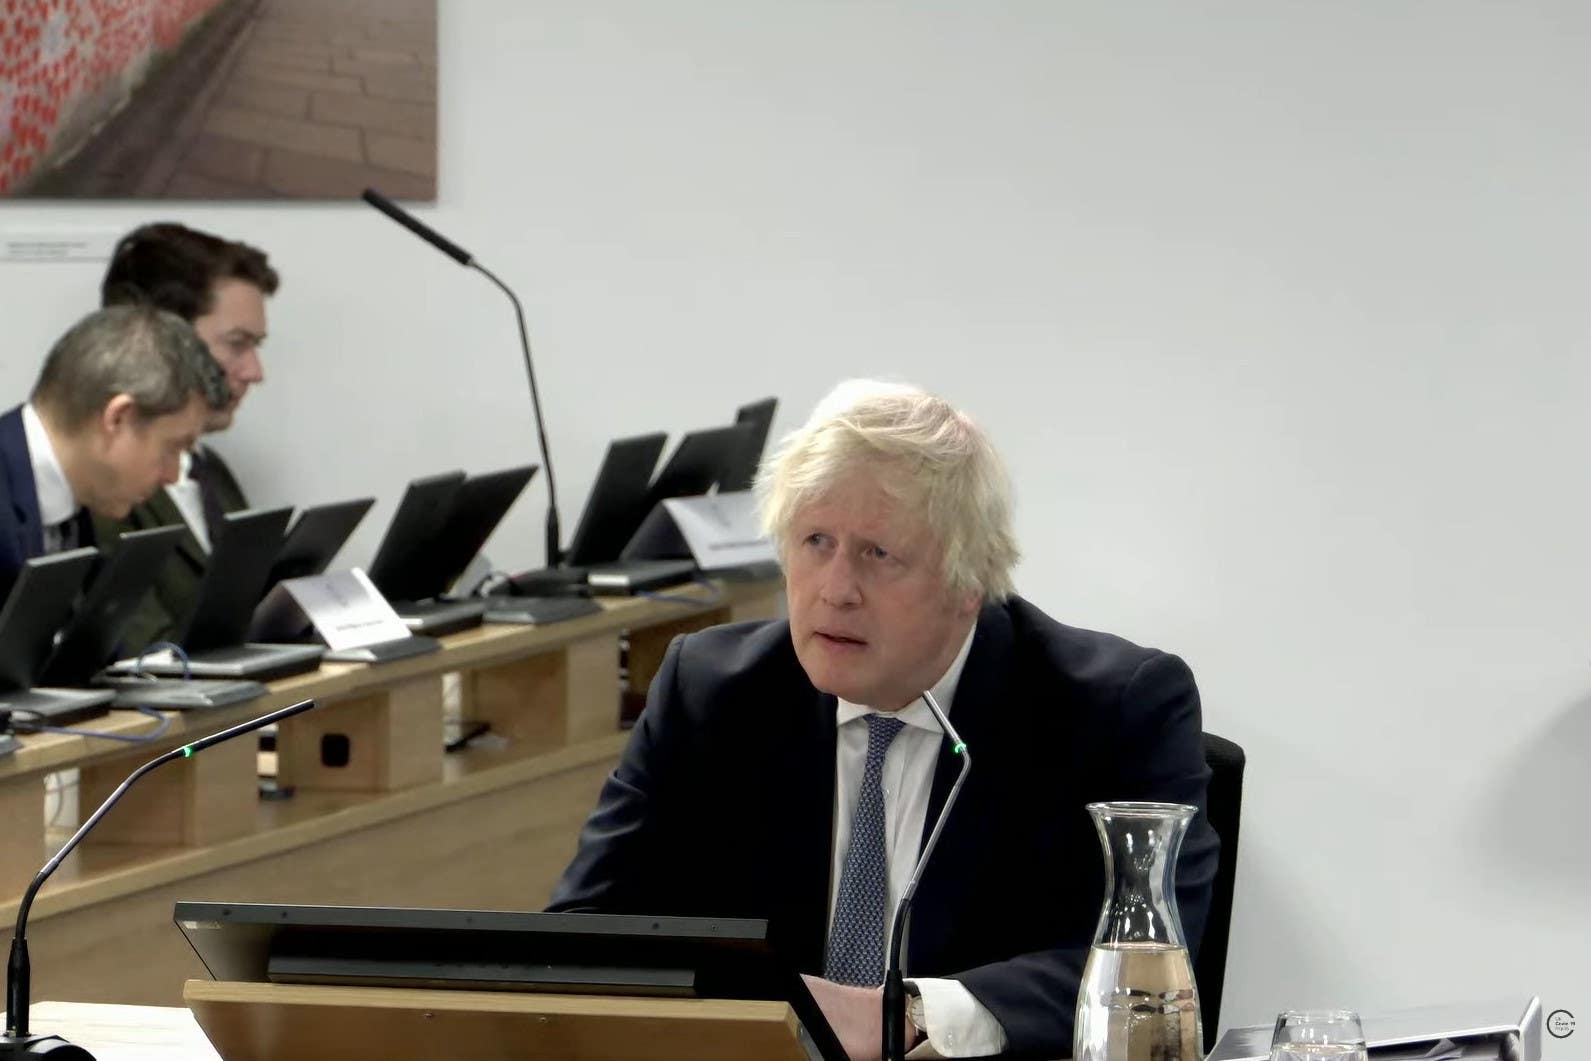 Boris Johnson is giving his second and final day of evidence to the Covid inquiry (UK Covid-19 Inquiry/PA)